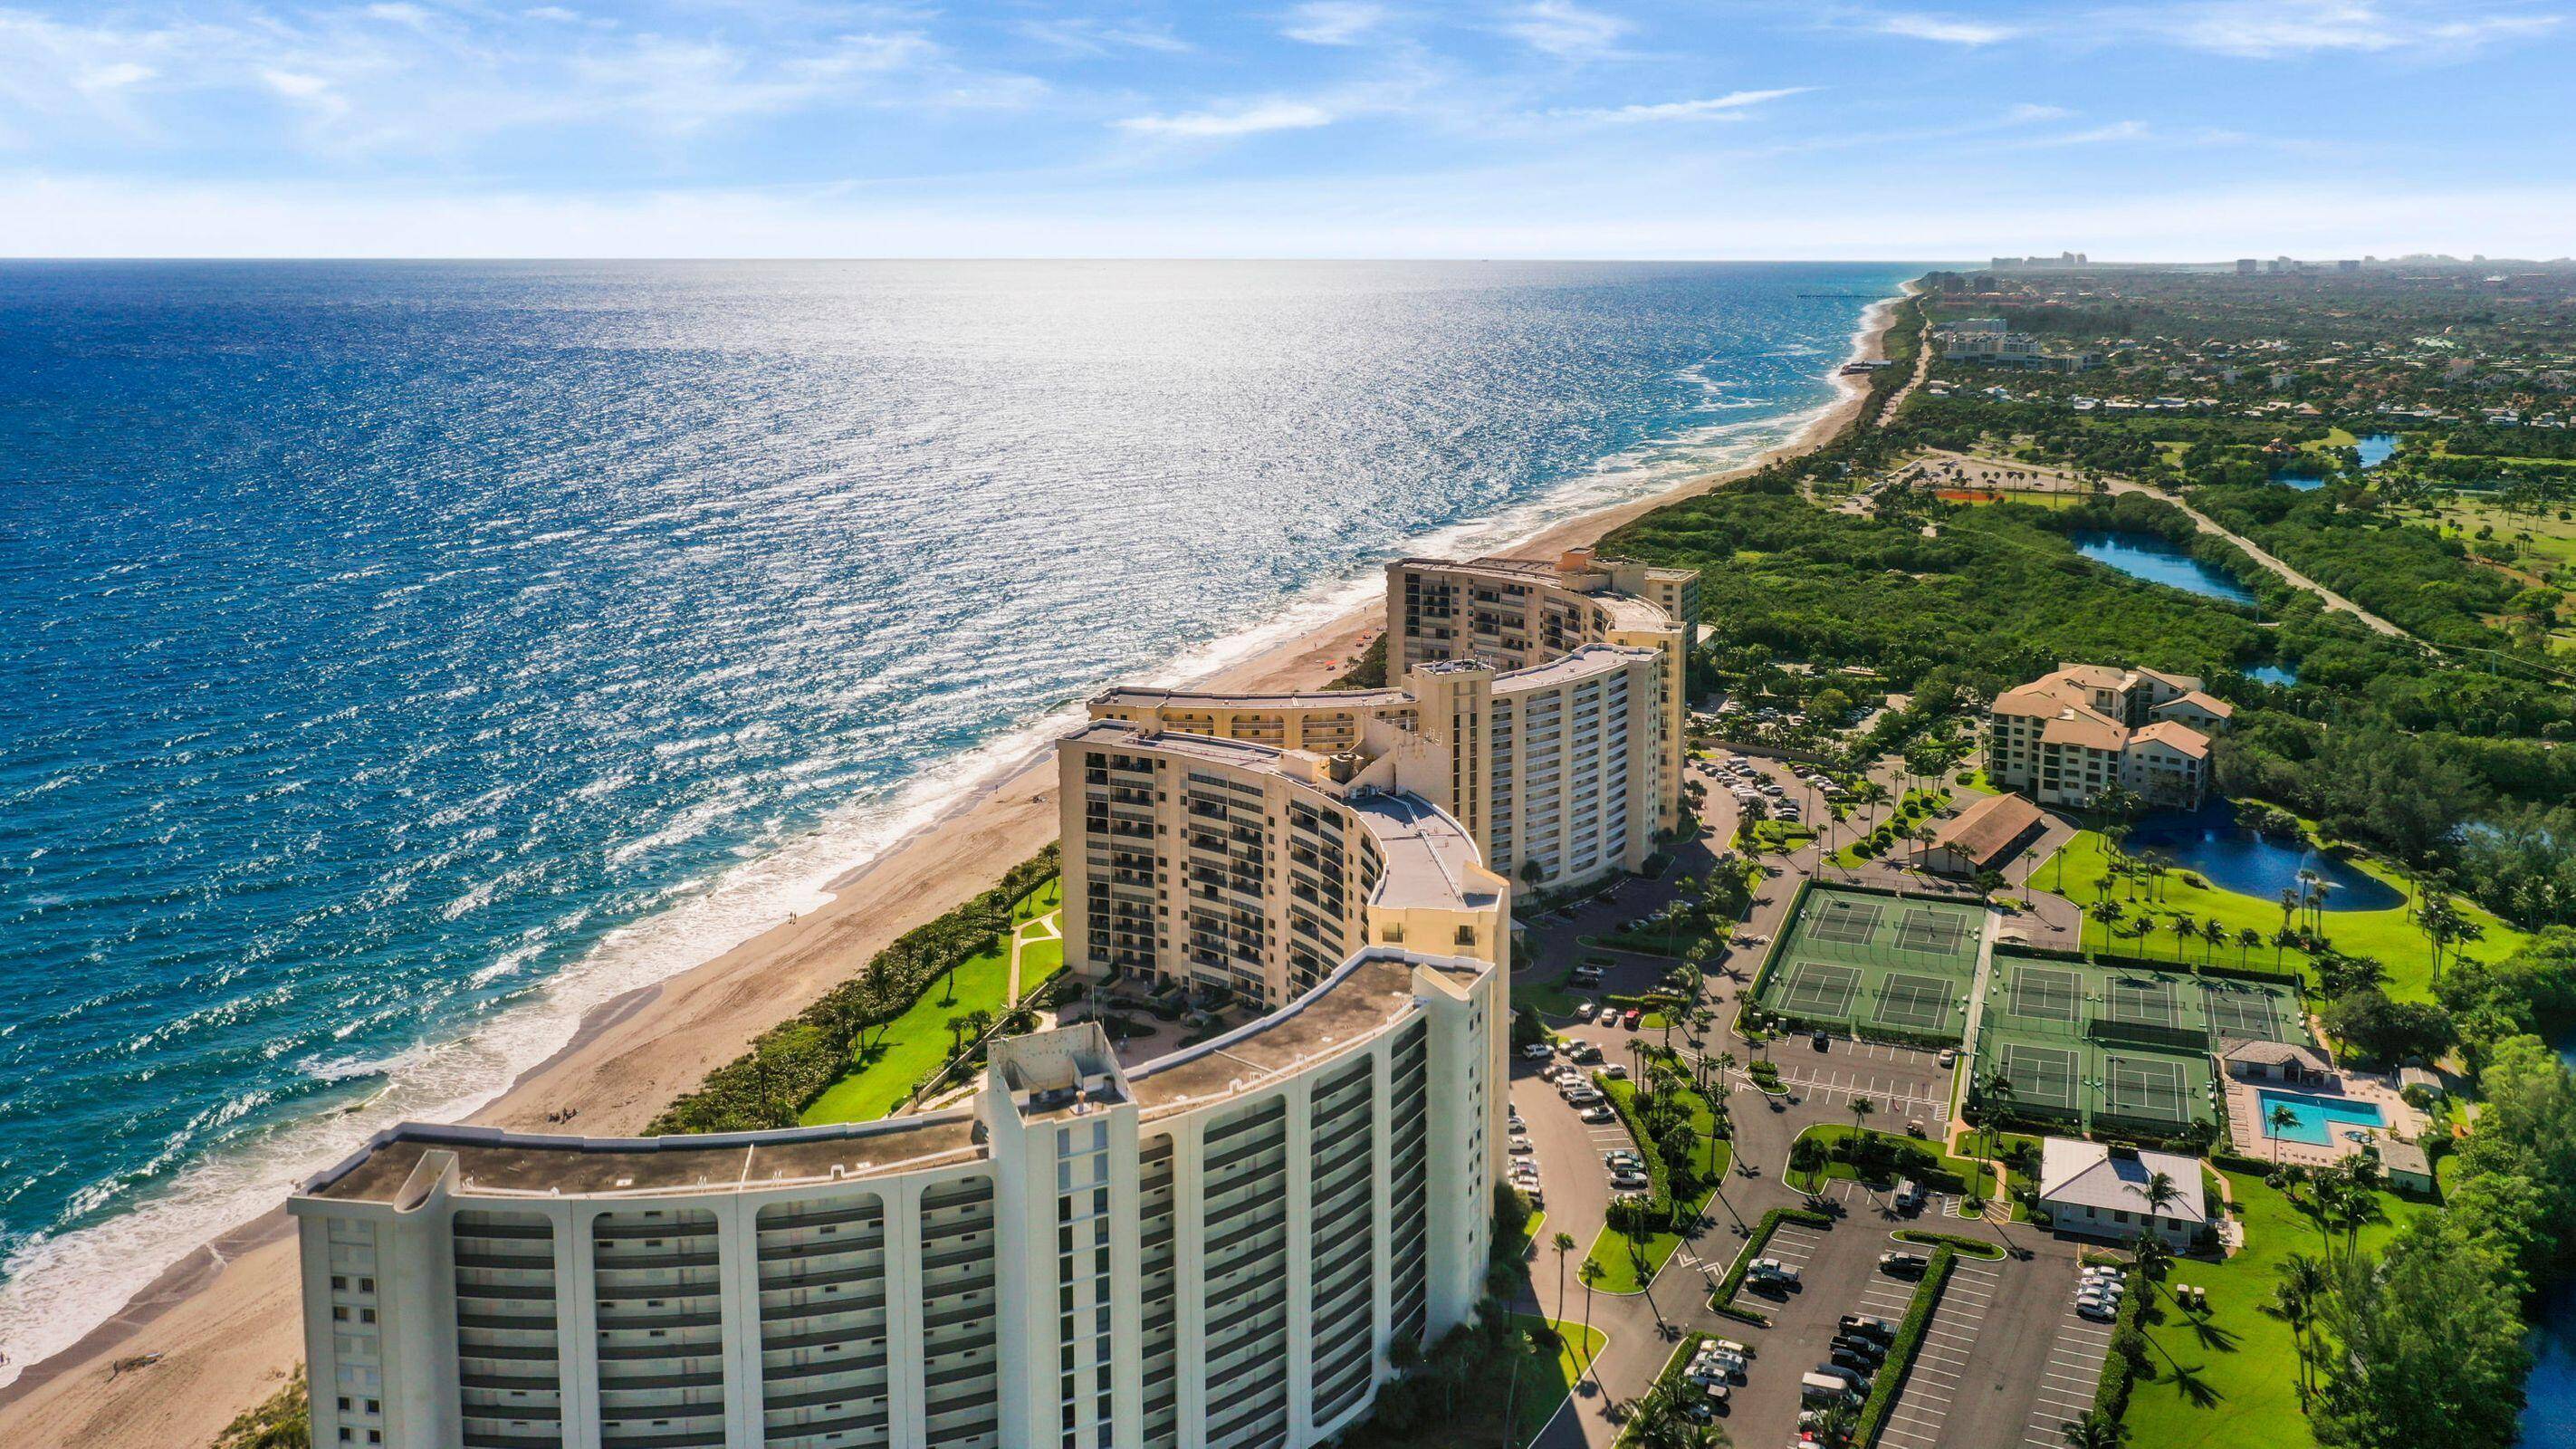 Come and enjoy the best of what Jupiter has to offer with expansive oceanfront views and the most gorgeous sunrises !